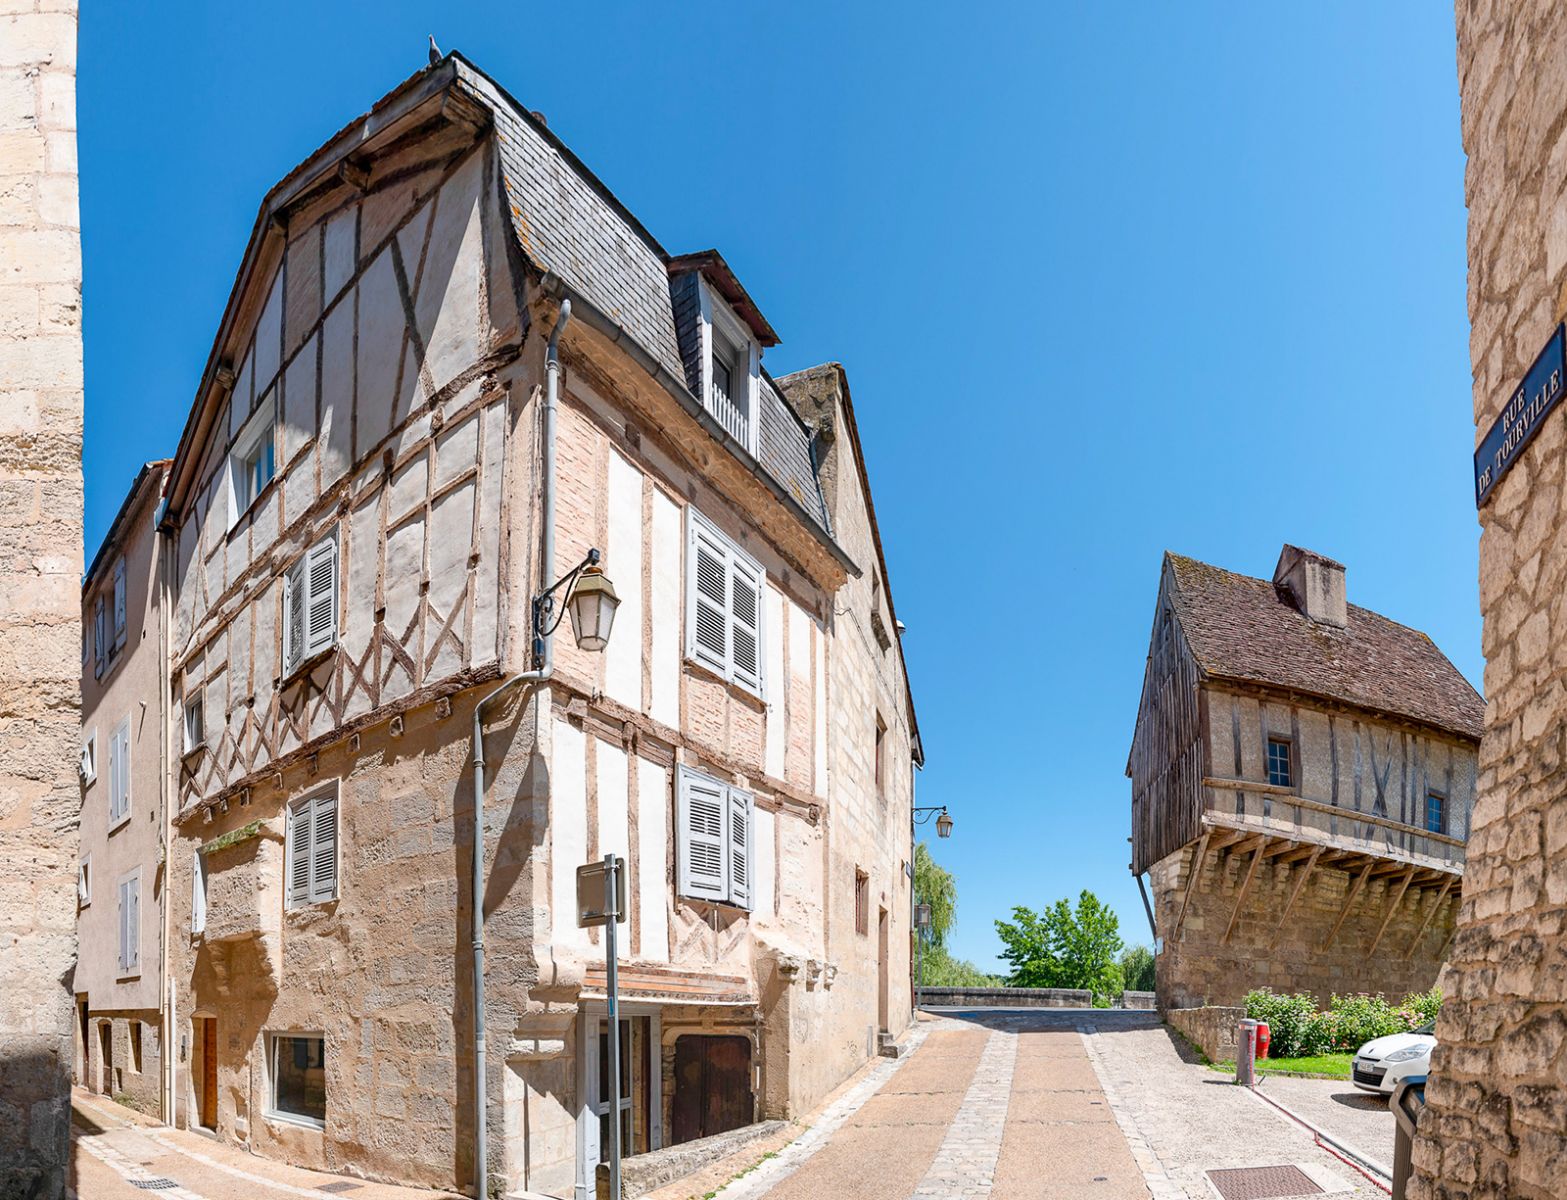 The apartments of the Échafaud